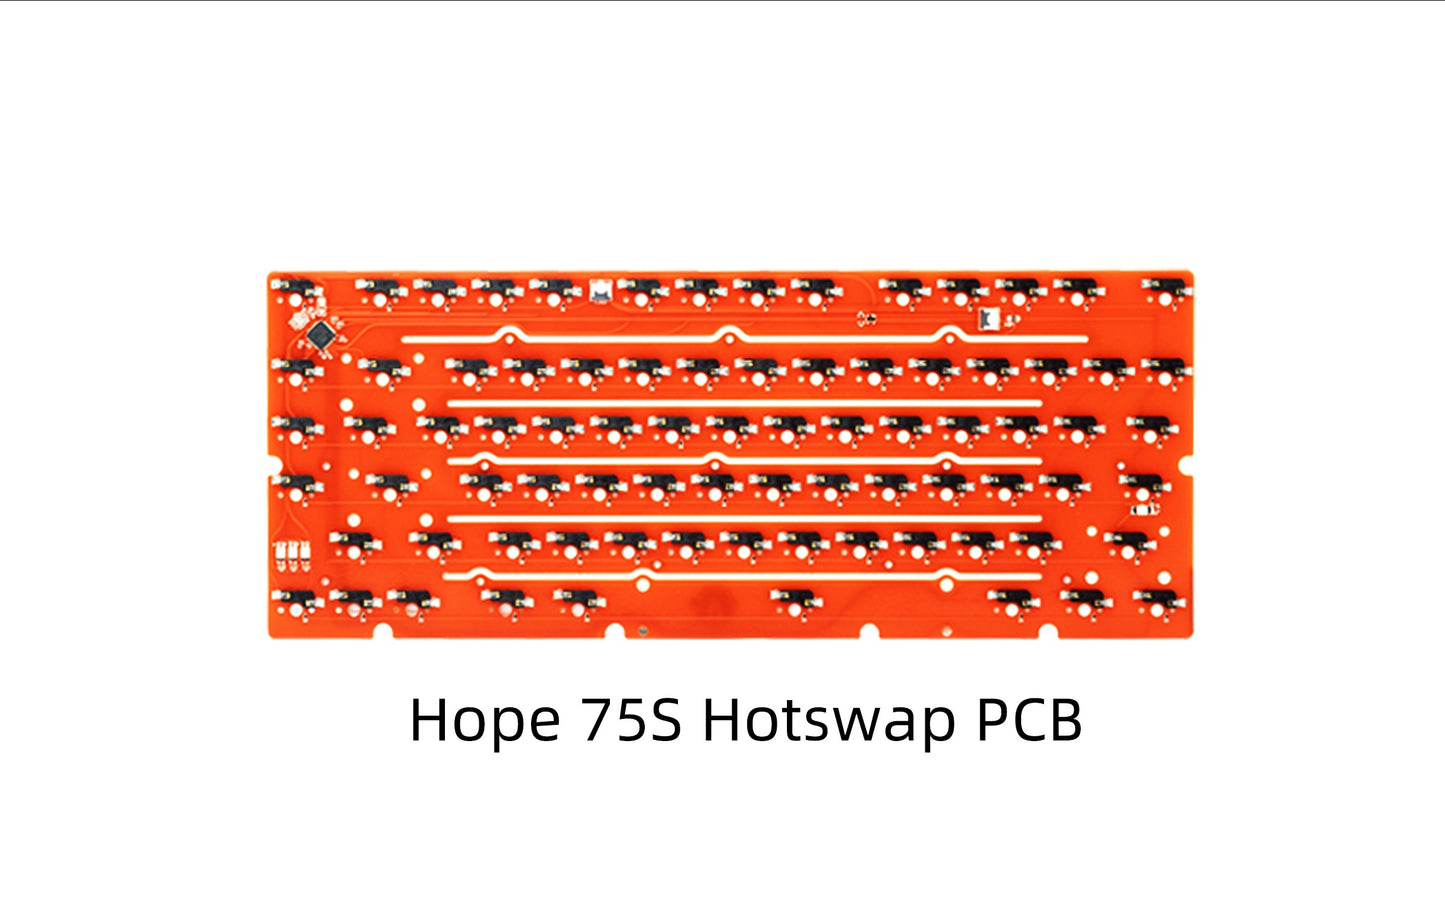 [EXTRA] HOPE75S HOTSWAP PCB (FREE SHIPPING TO SOME COUNTRIES)